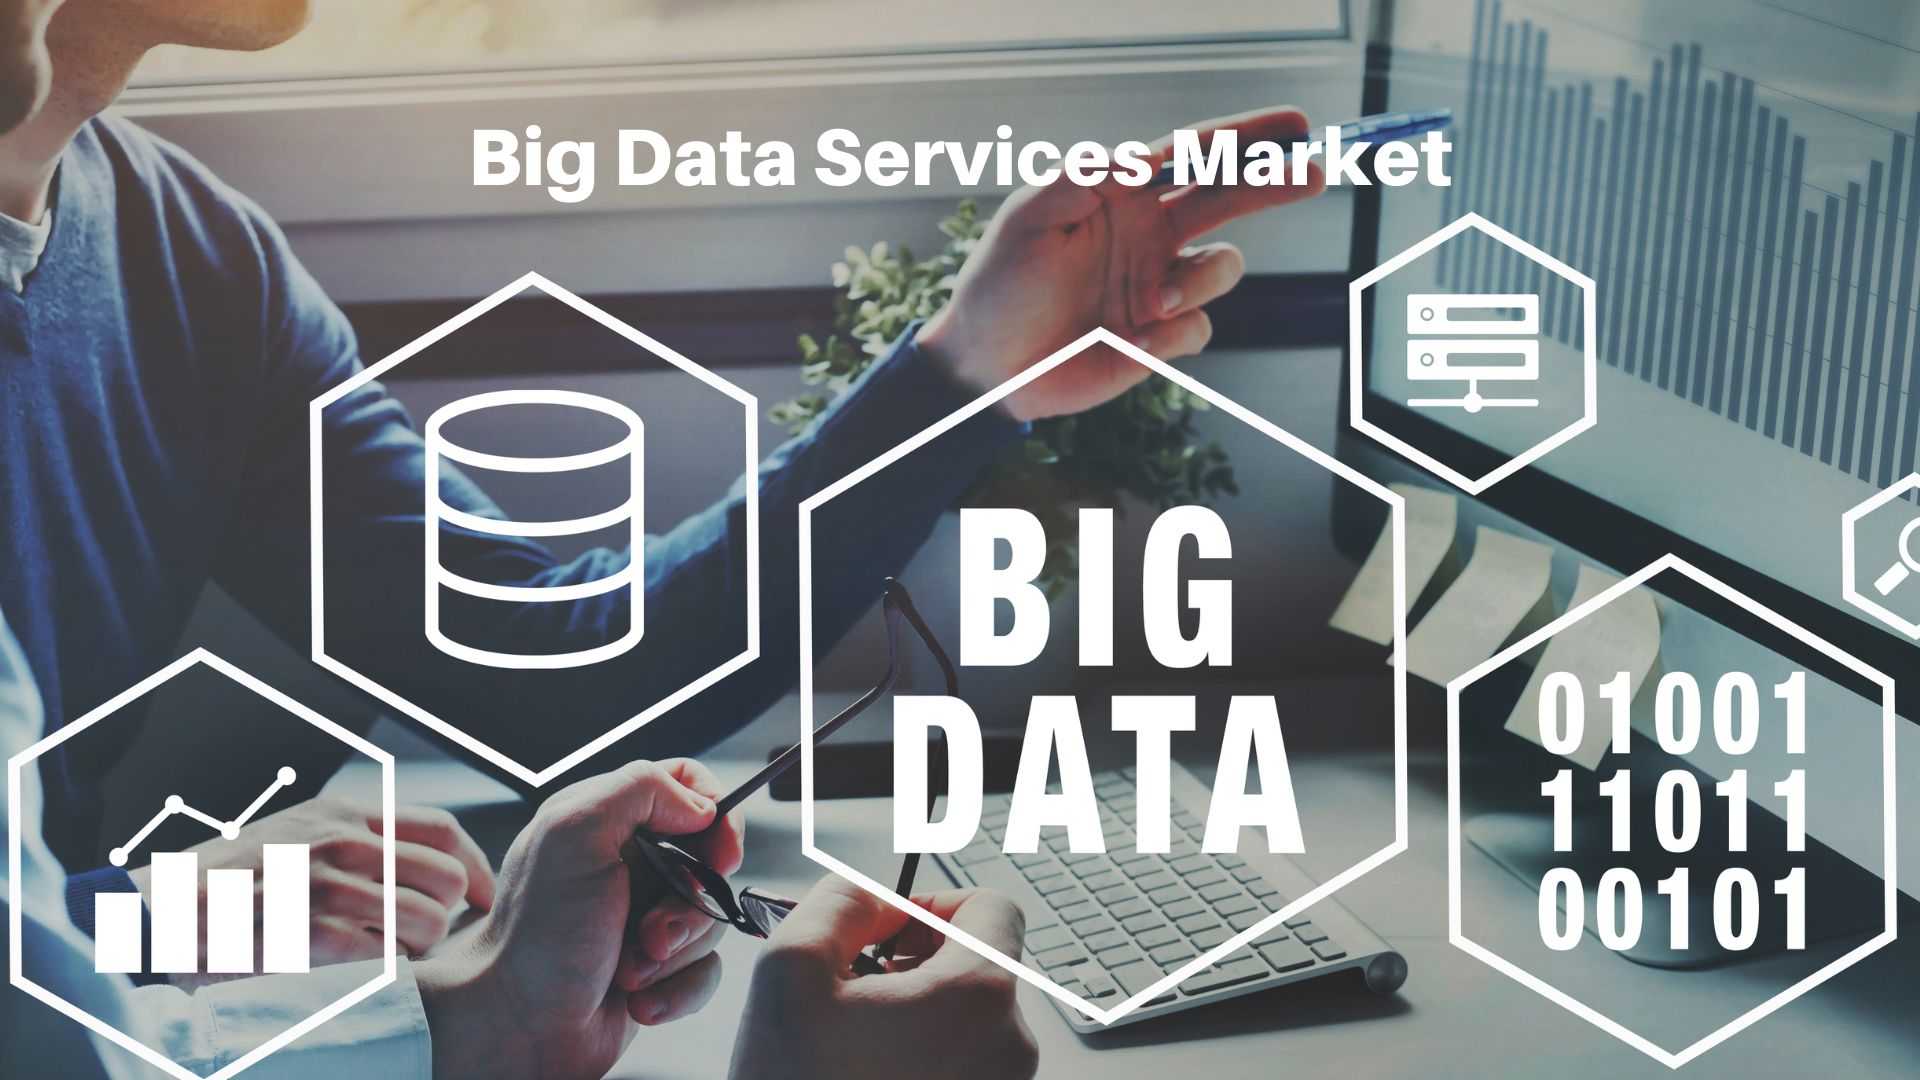 Big Data Services Market is projected to reach a value of USD 298.11 billion by 2032